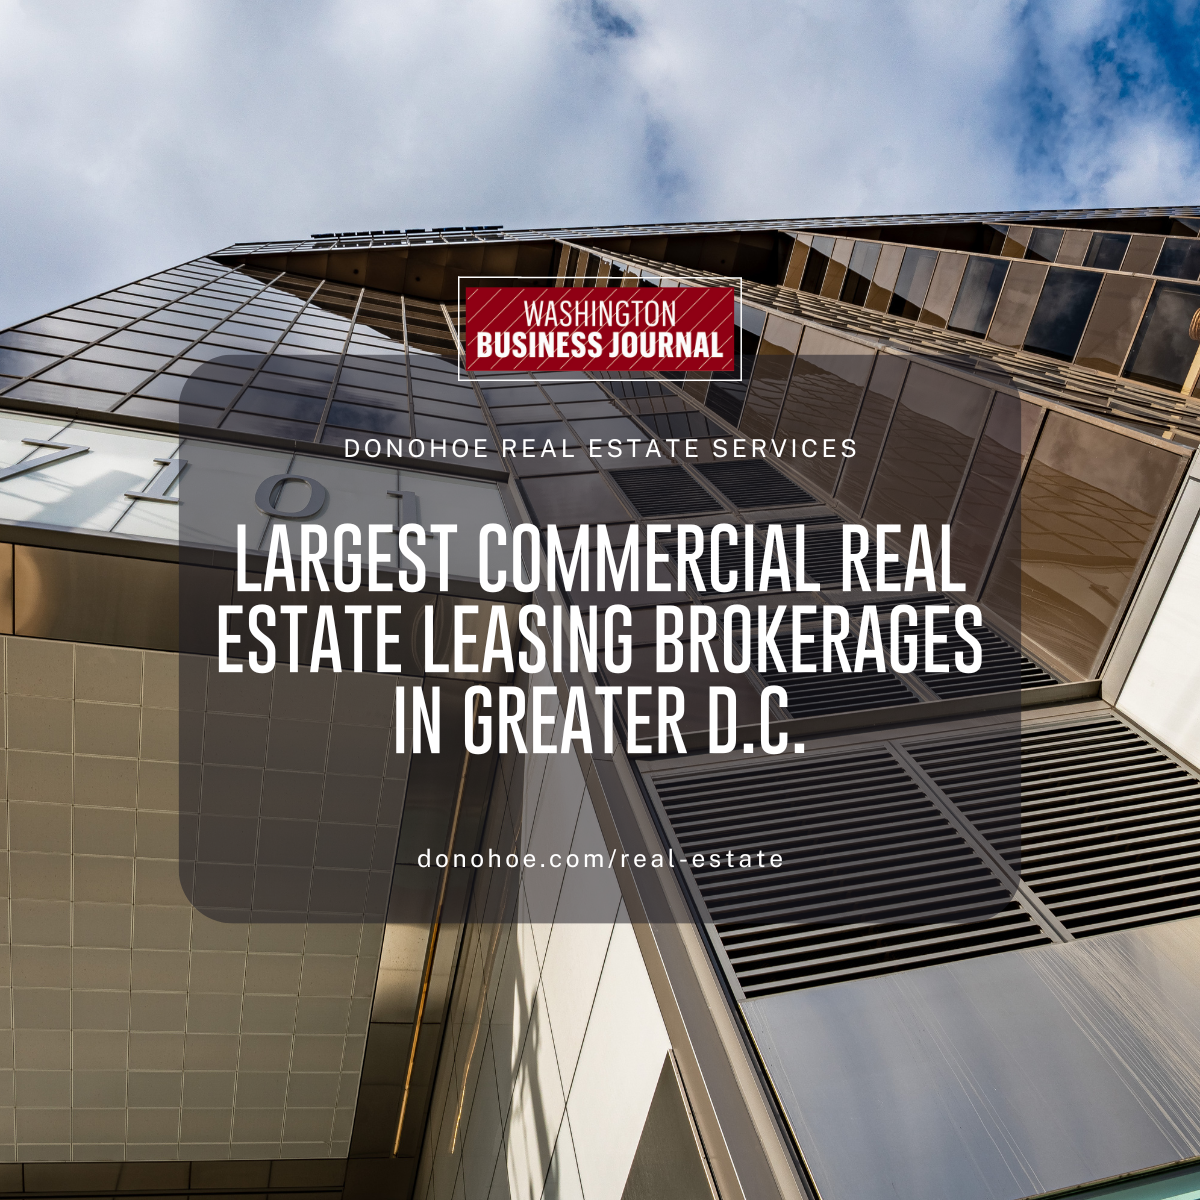 Donohoe Named One Of The Largest Commercial Real Estate Leasing Brokerages In Greater D.C. Thumbnail